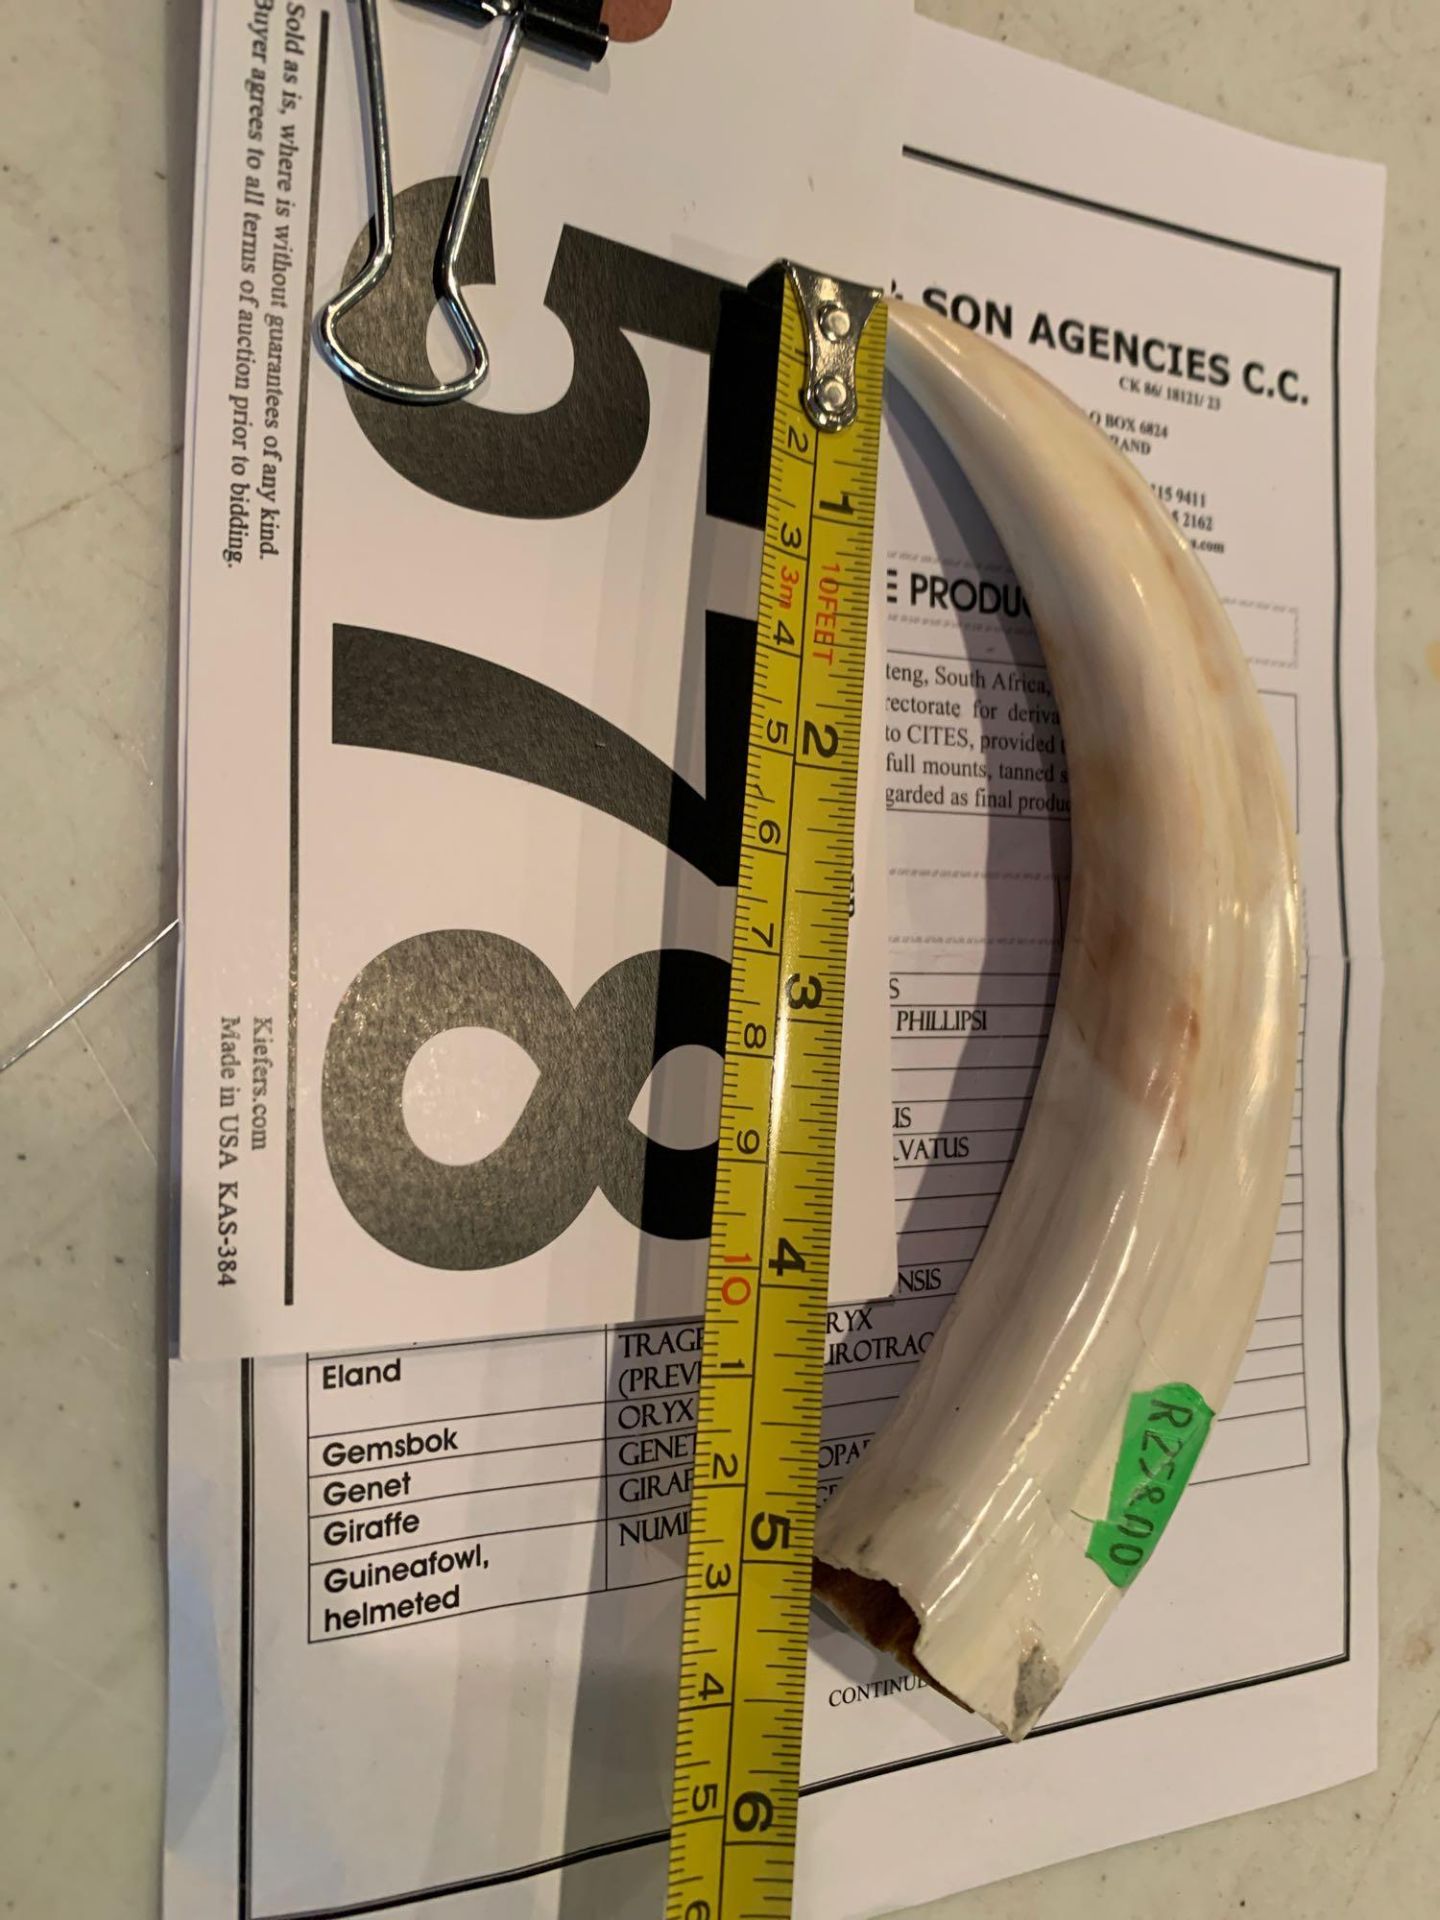 Warthog Tusk with Import Receipt - Approx 6" Long - Image 2 of 3